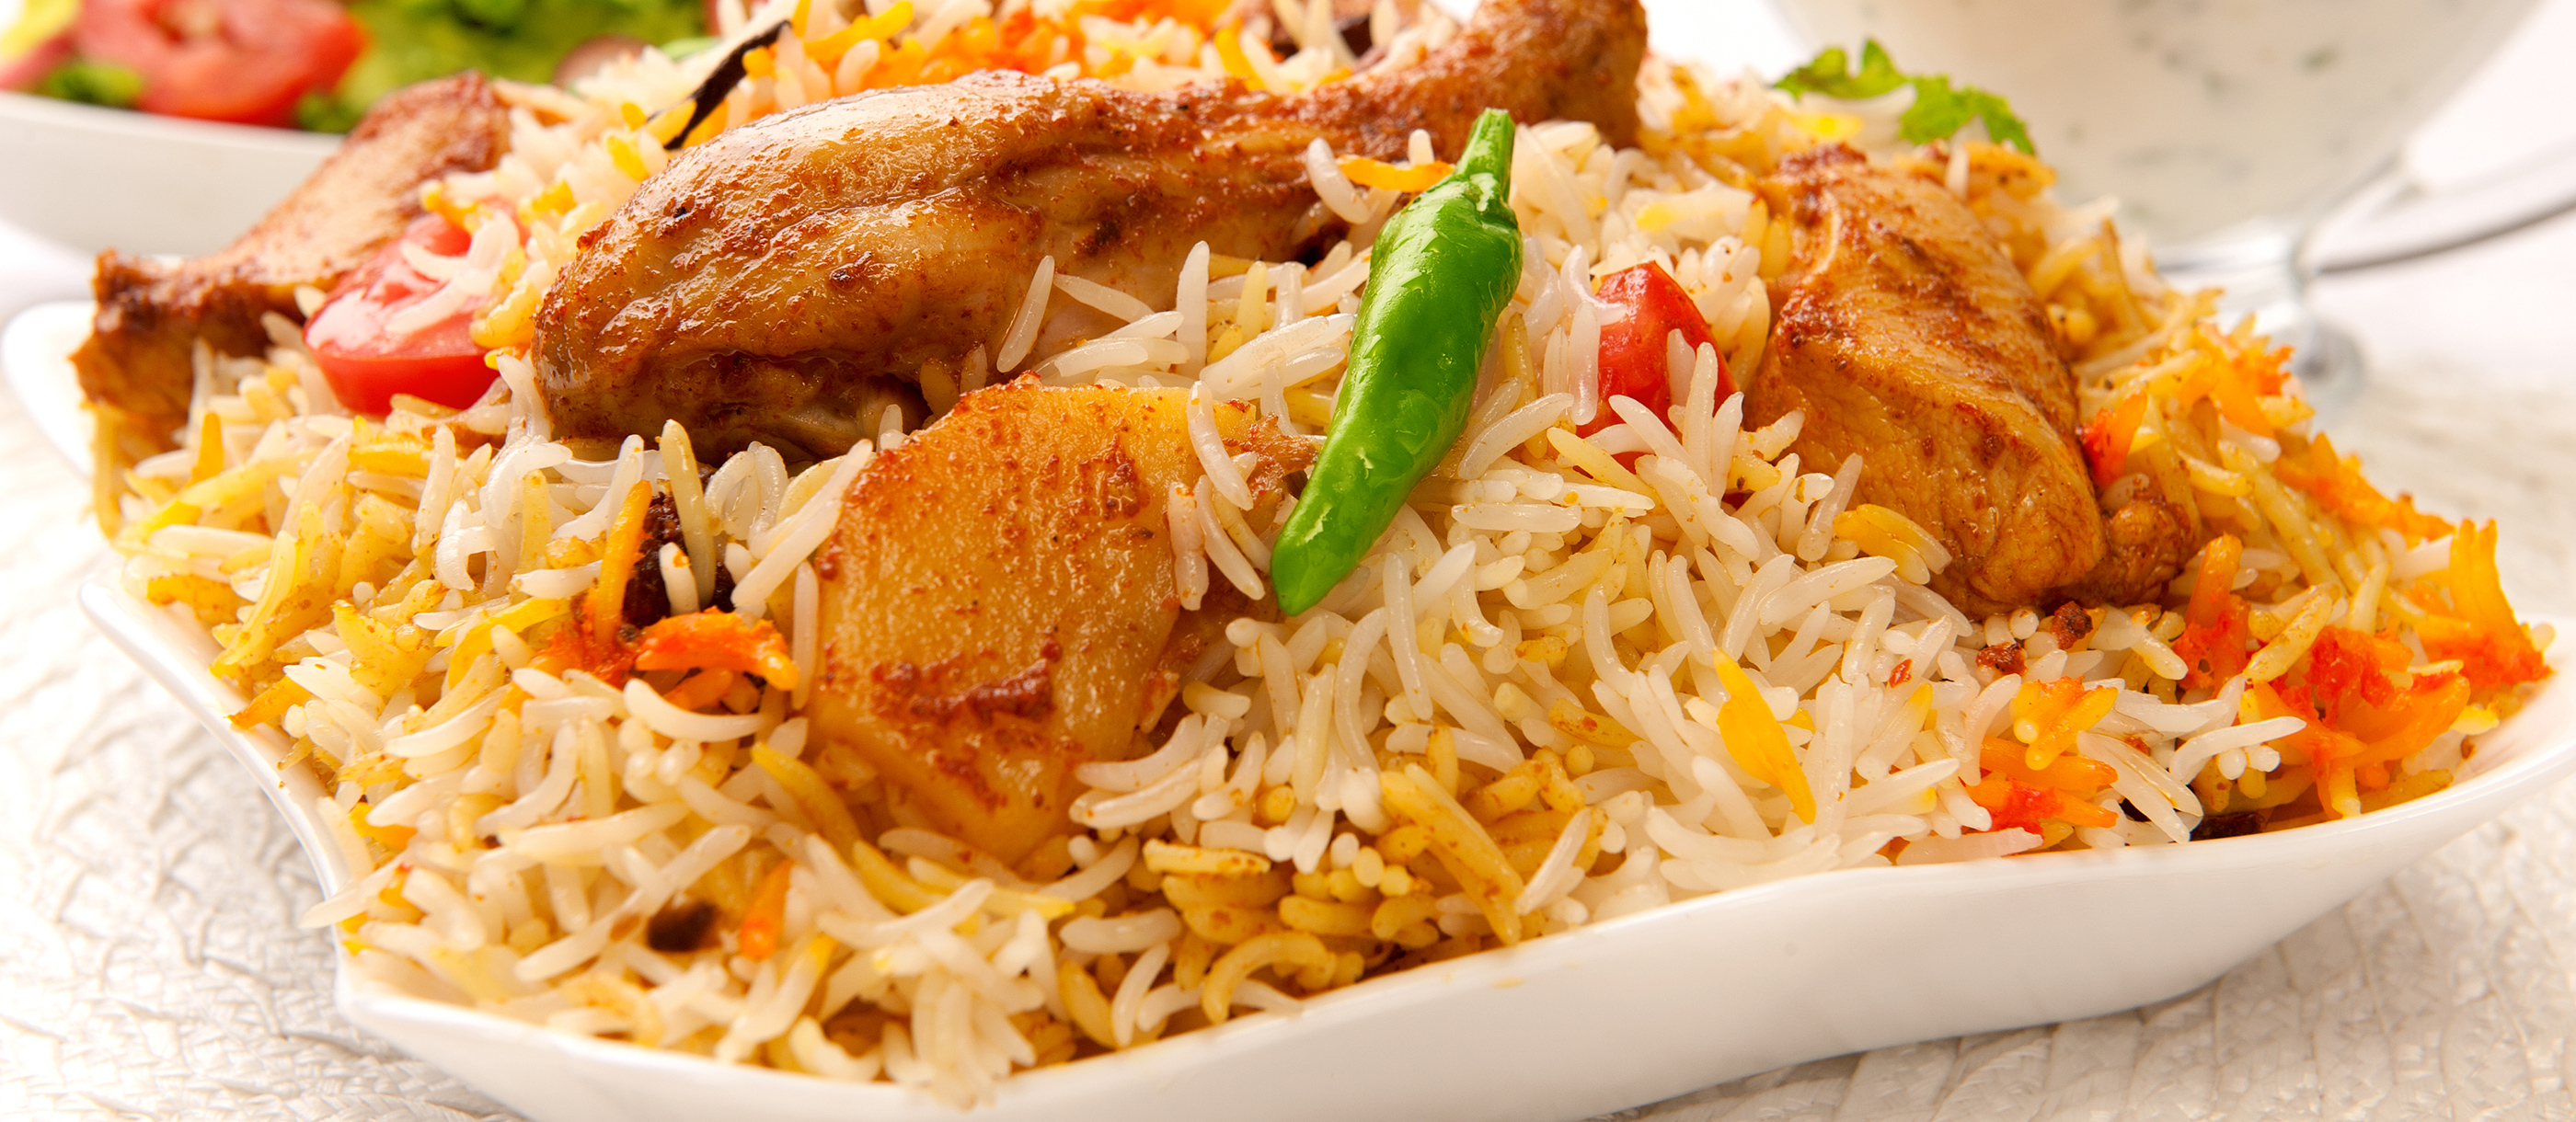 Most Popular Indian Food Dishes